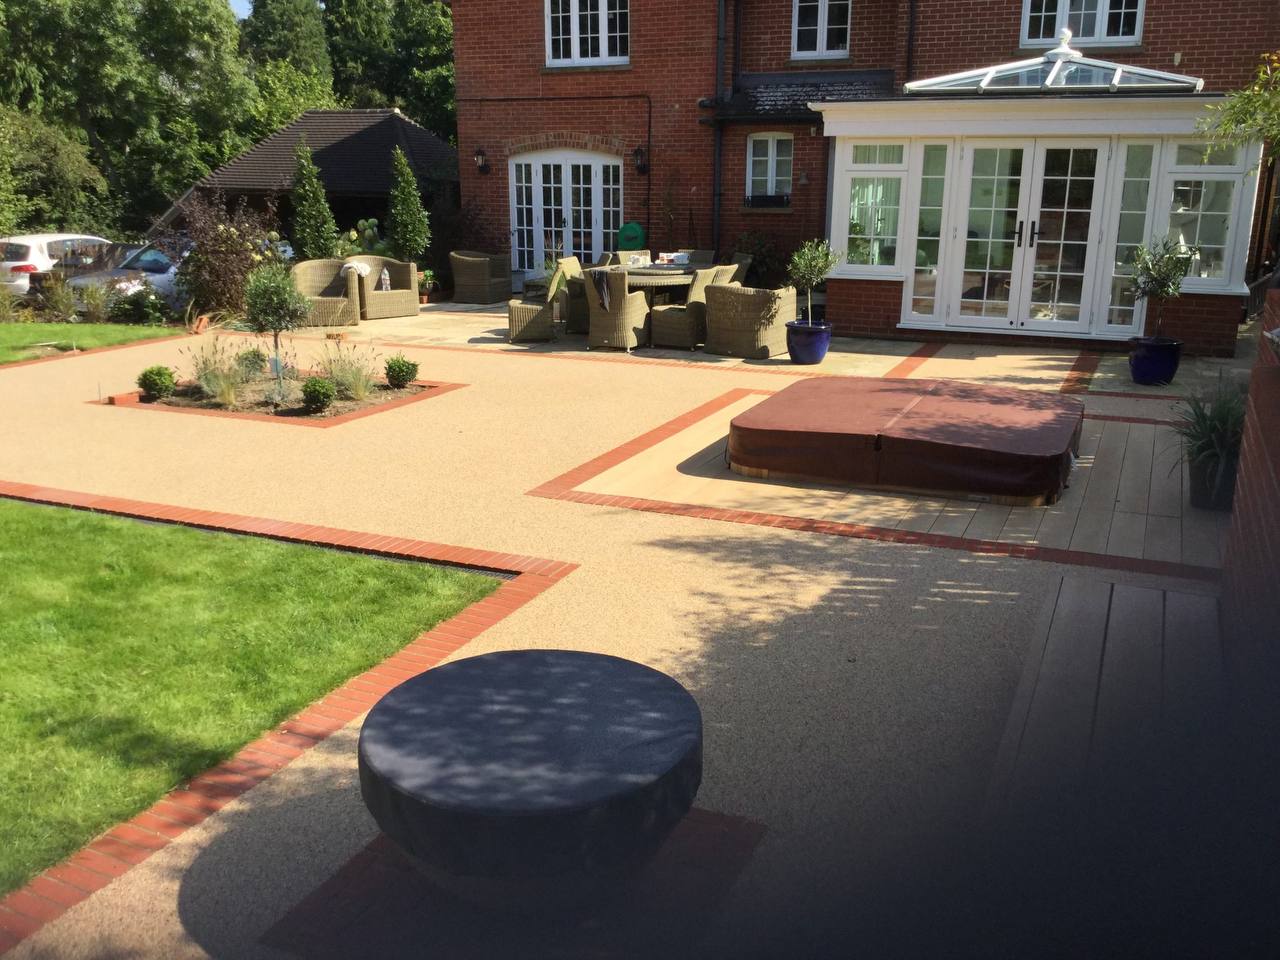 This is a photo of a Resin bound patio carried out in Cheshire. All works done by Bury Resin Driveways Cheshire